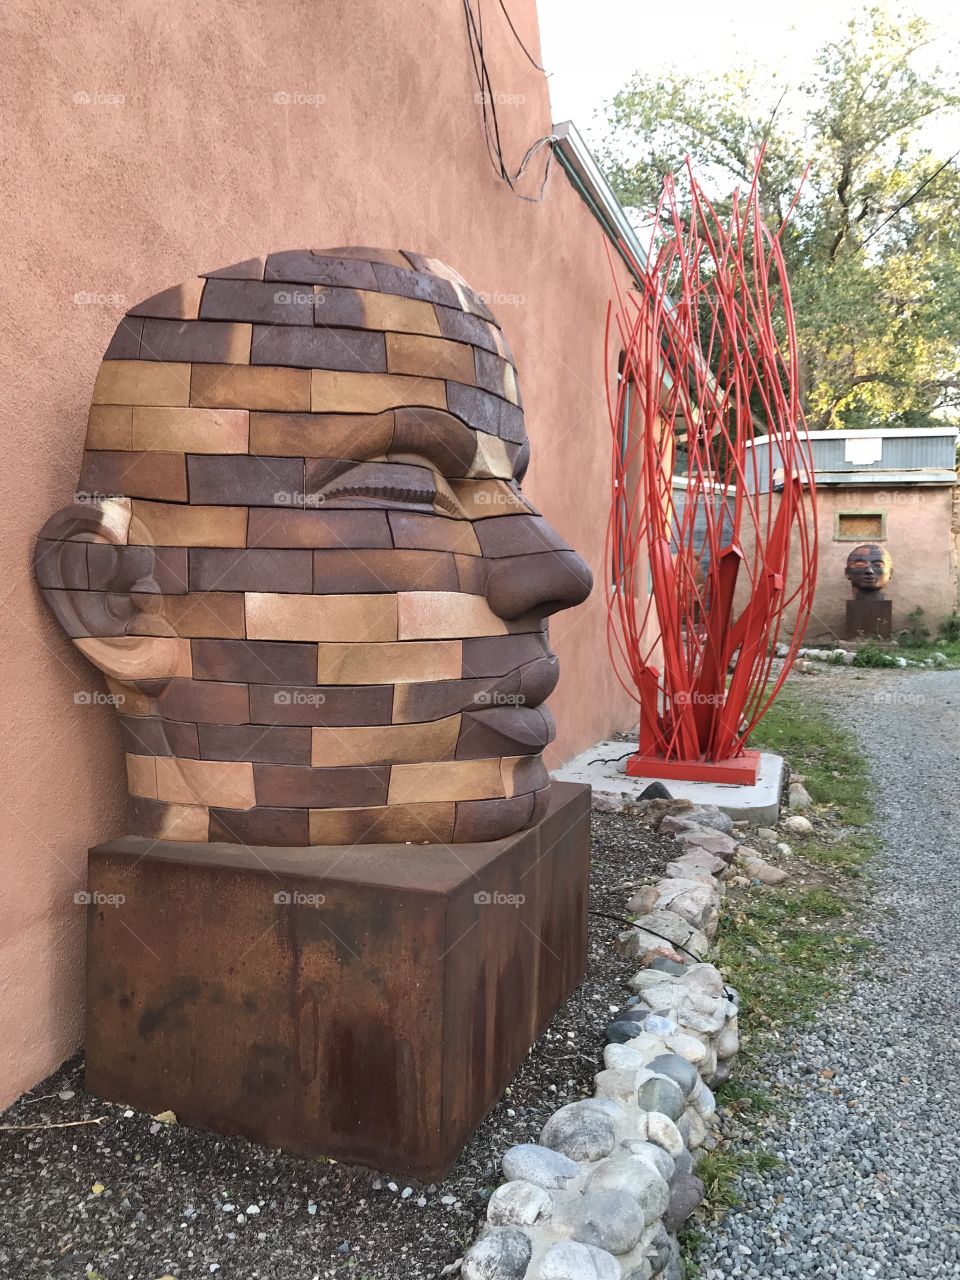 Art installations and sculptures along Canyon Road in Santa Fe, New Mexico